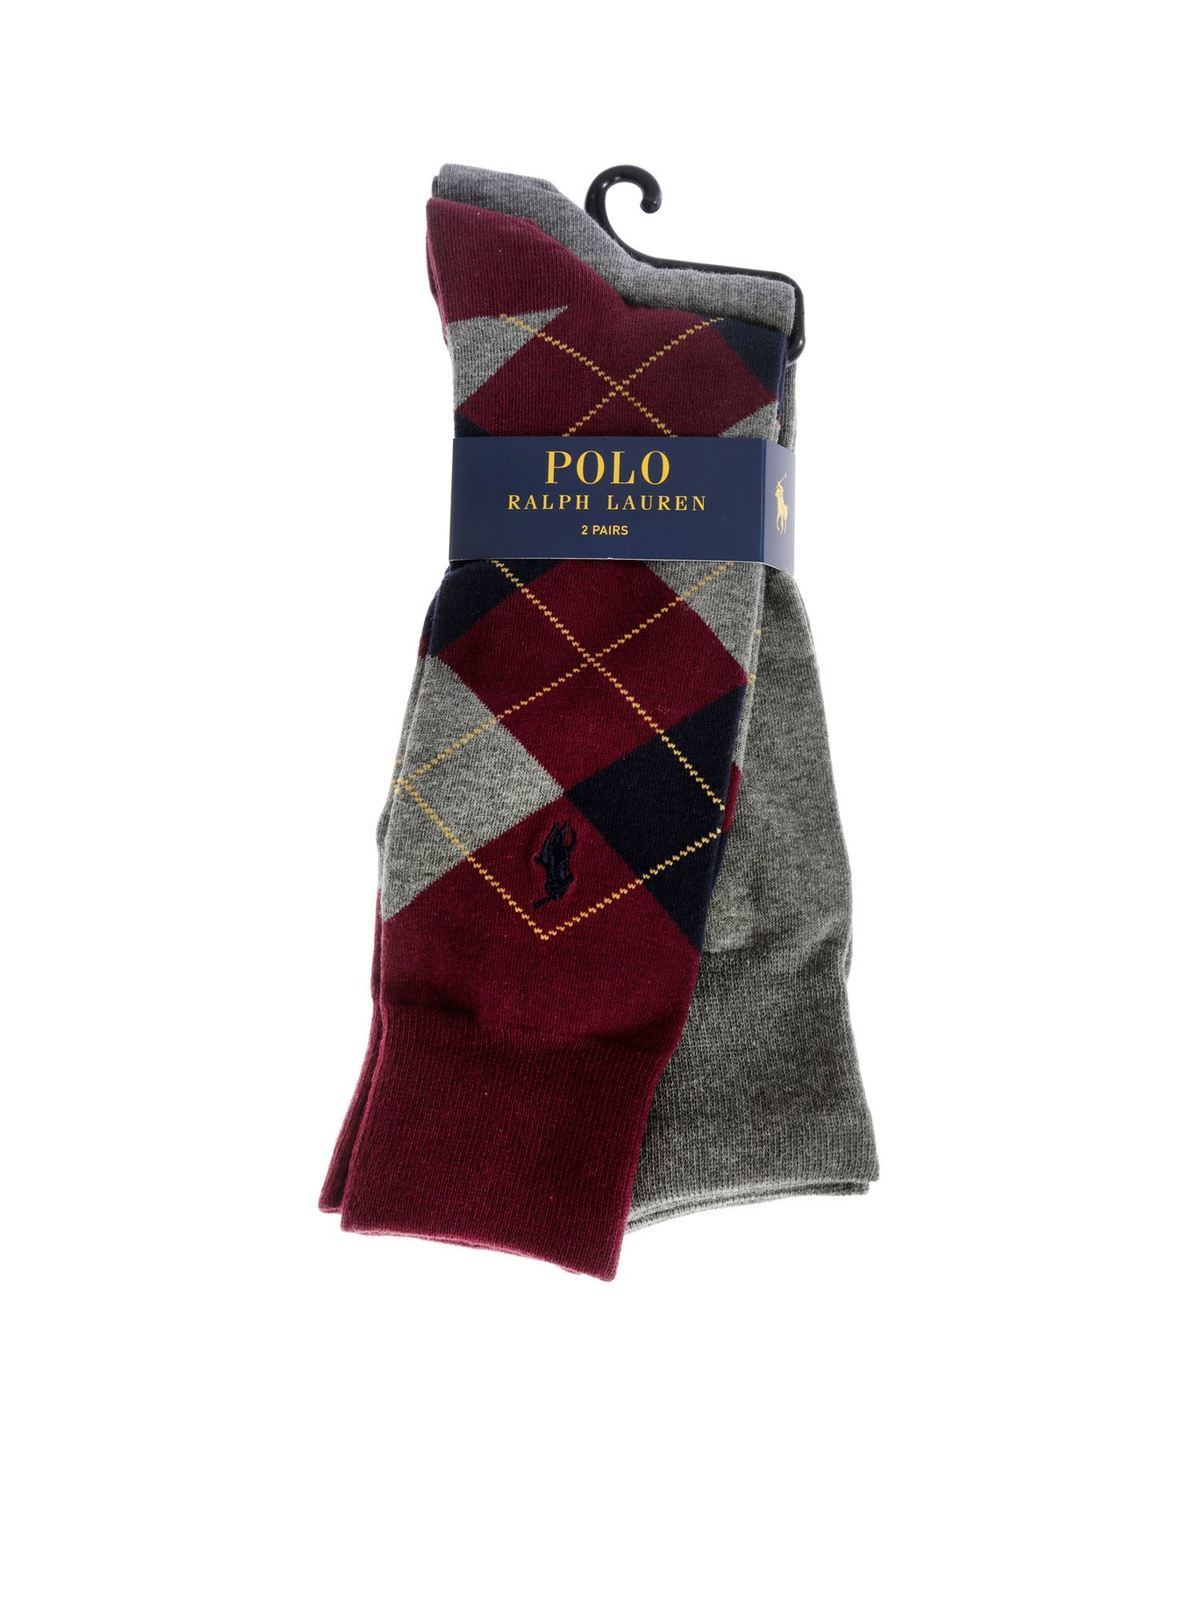 Polo Ralph Lauren 2 Socks Set In Red And Gray In Multicolour